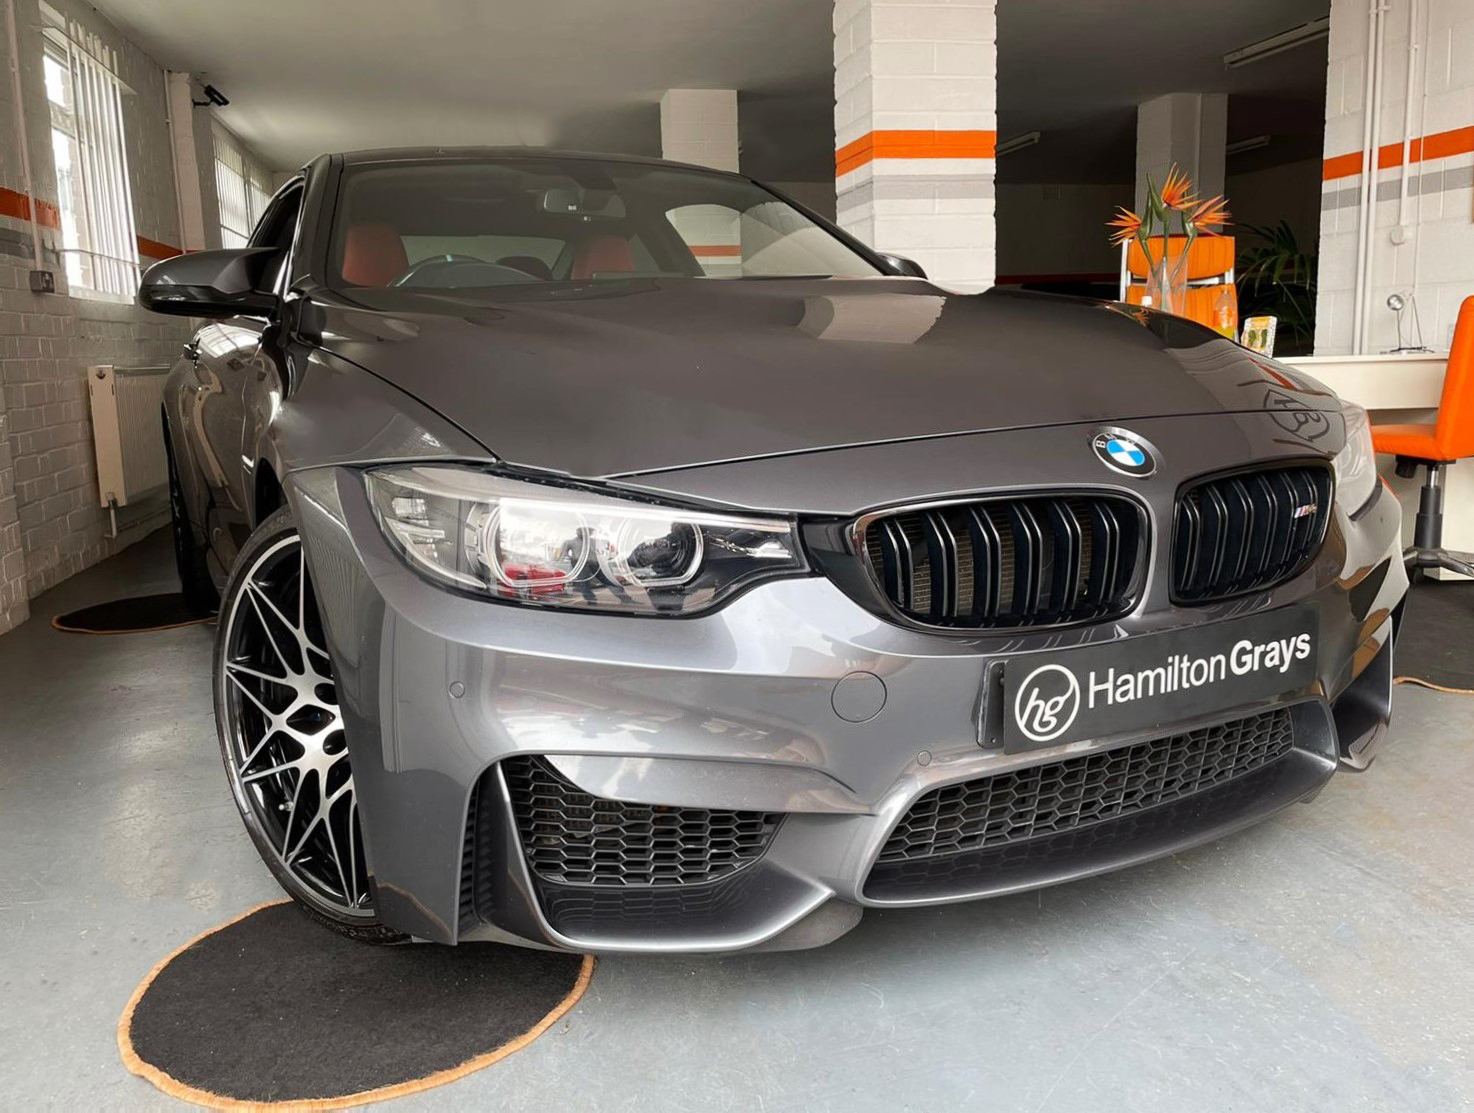 2018 (18)  BMW M4 3.0 V6 BiTurbo [Competition] M DCT Coupe. In Mineral Grey Metallic with Full Sakhir Orange Leather Upholstery. 33k.. FBMWSH. Great Spec’ (SOLD)